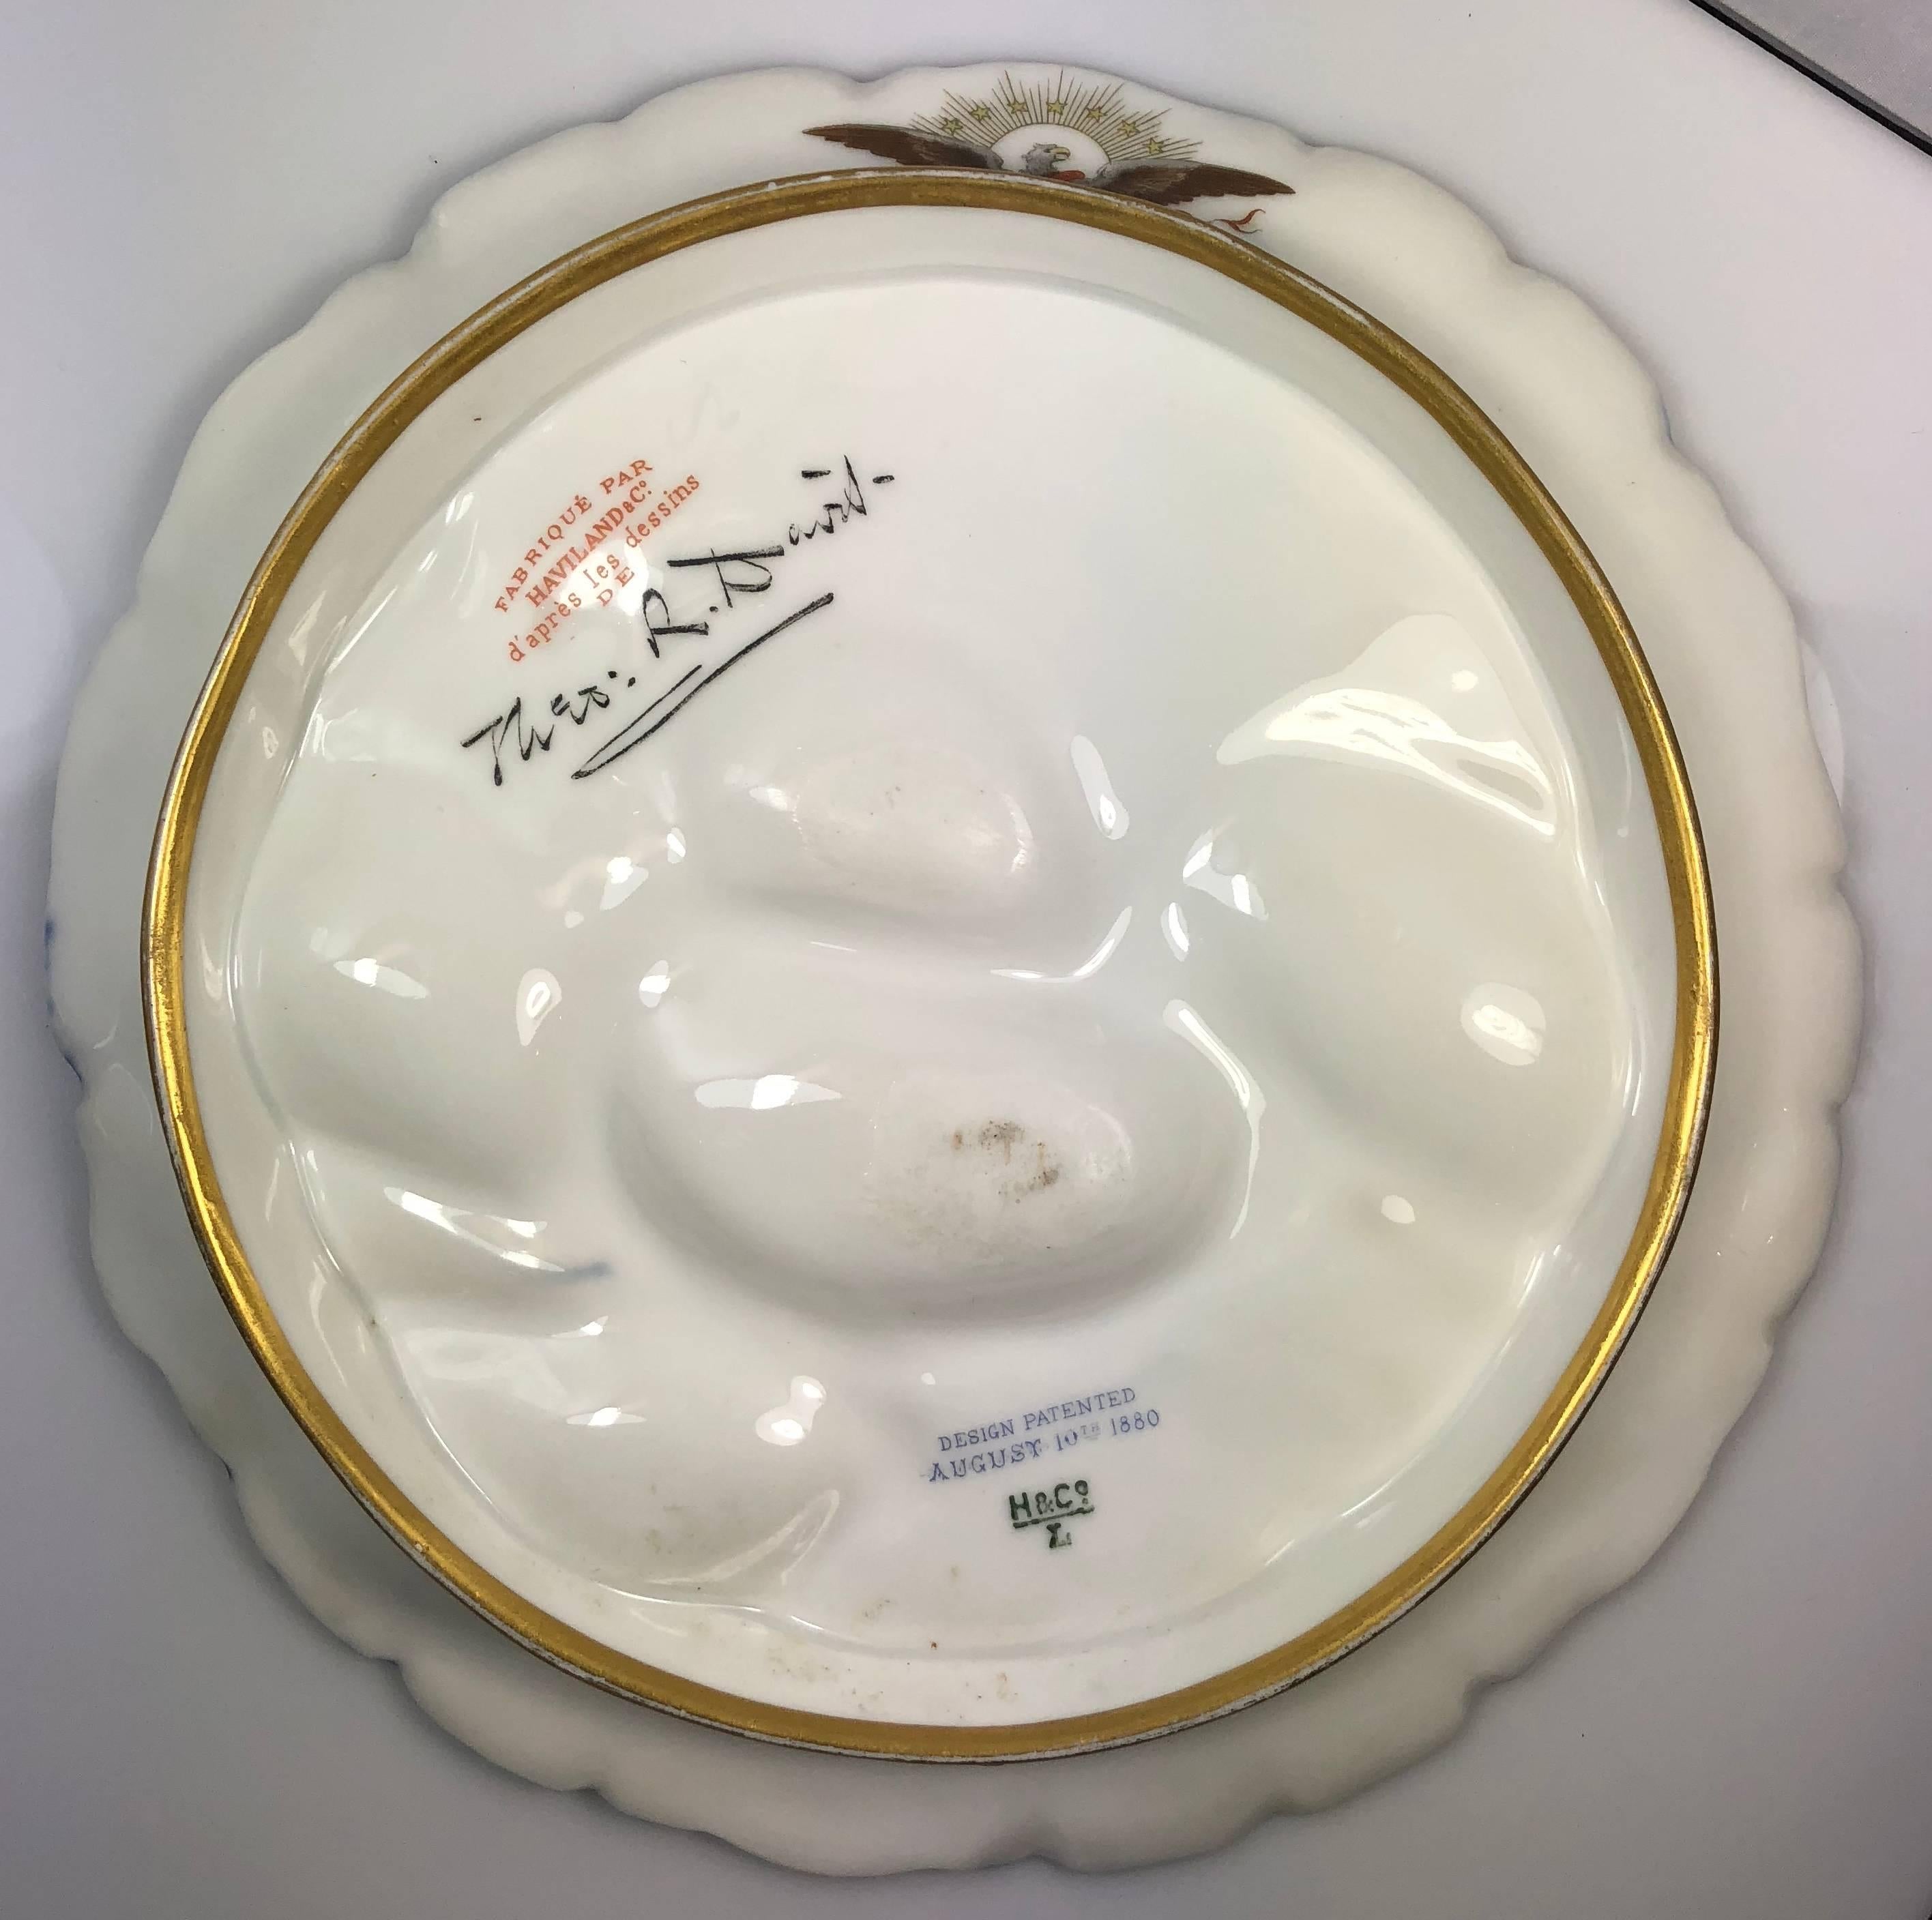 Antique French, Haviland Limoges Turkey pattern oyster plate for Rutherford B. Hayes, signed by Theo Davis, circa 1880.